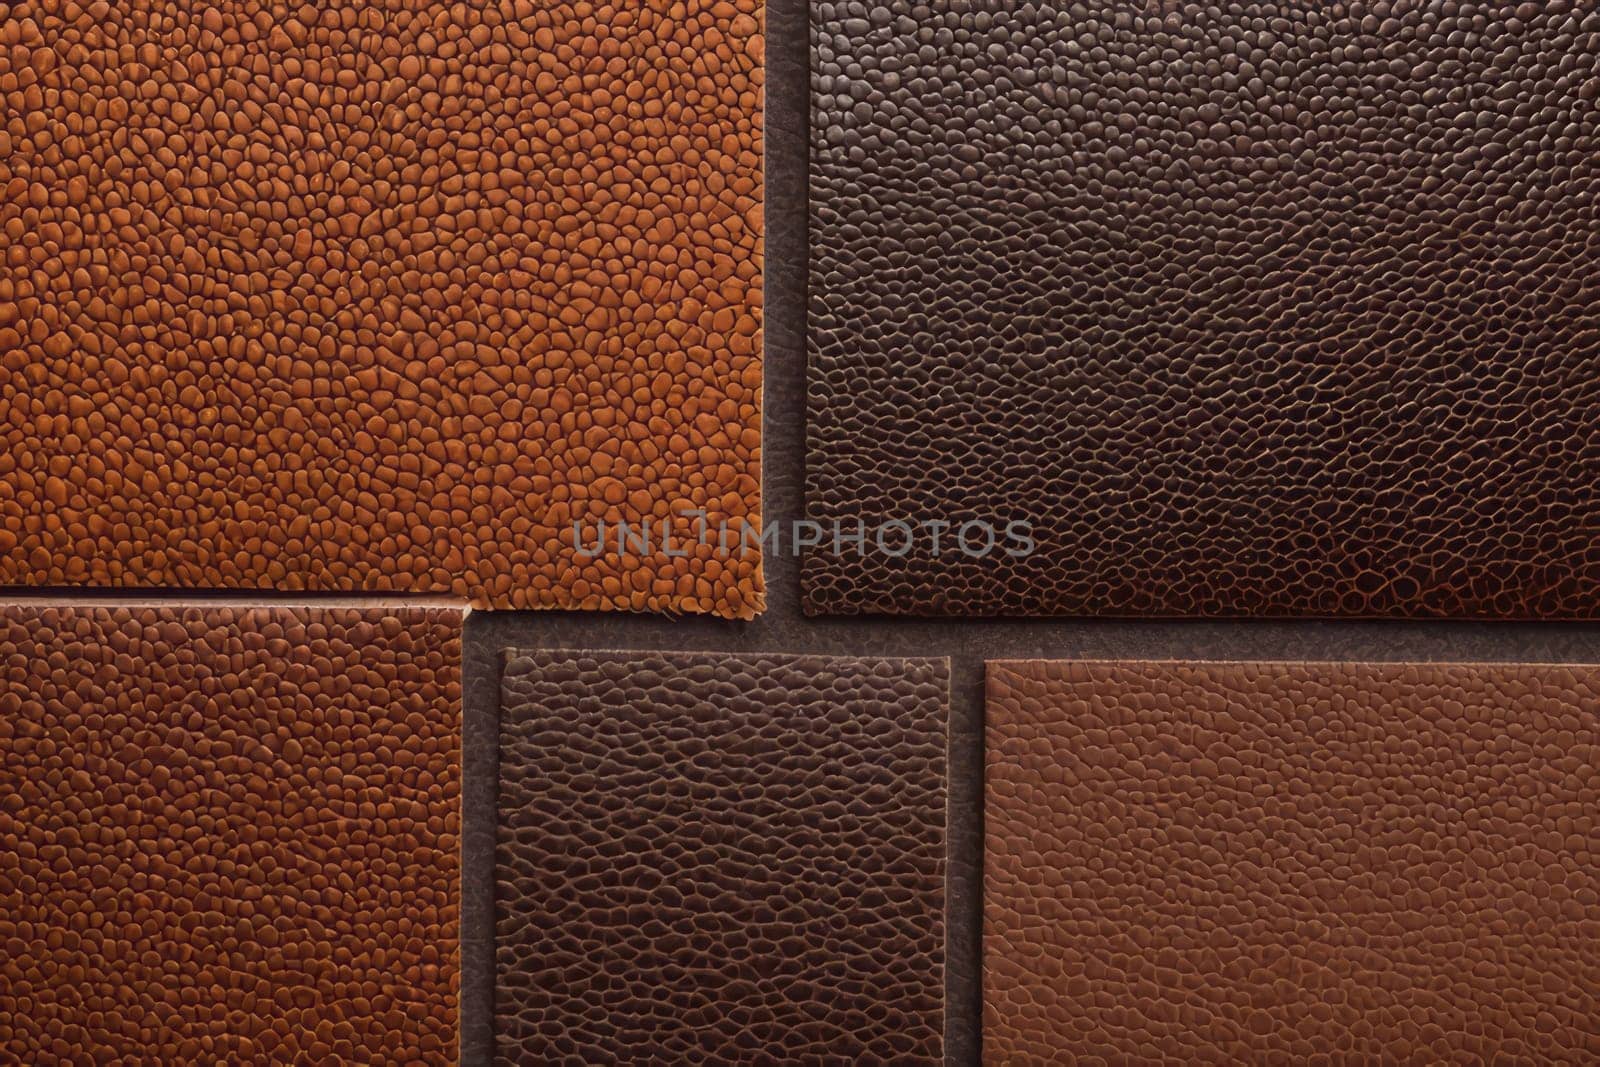 Intriguing close-up composition featuring various brown leather textures